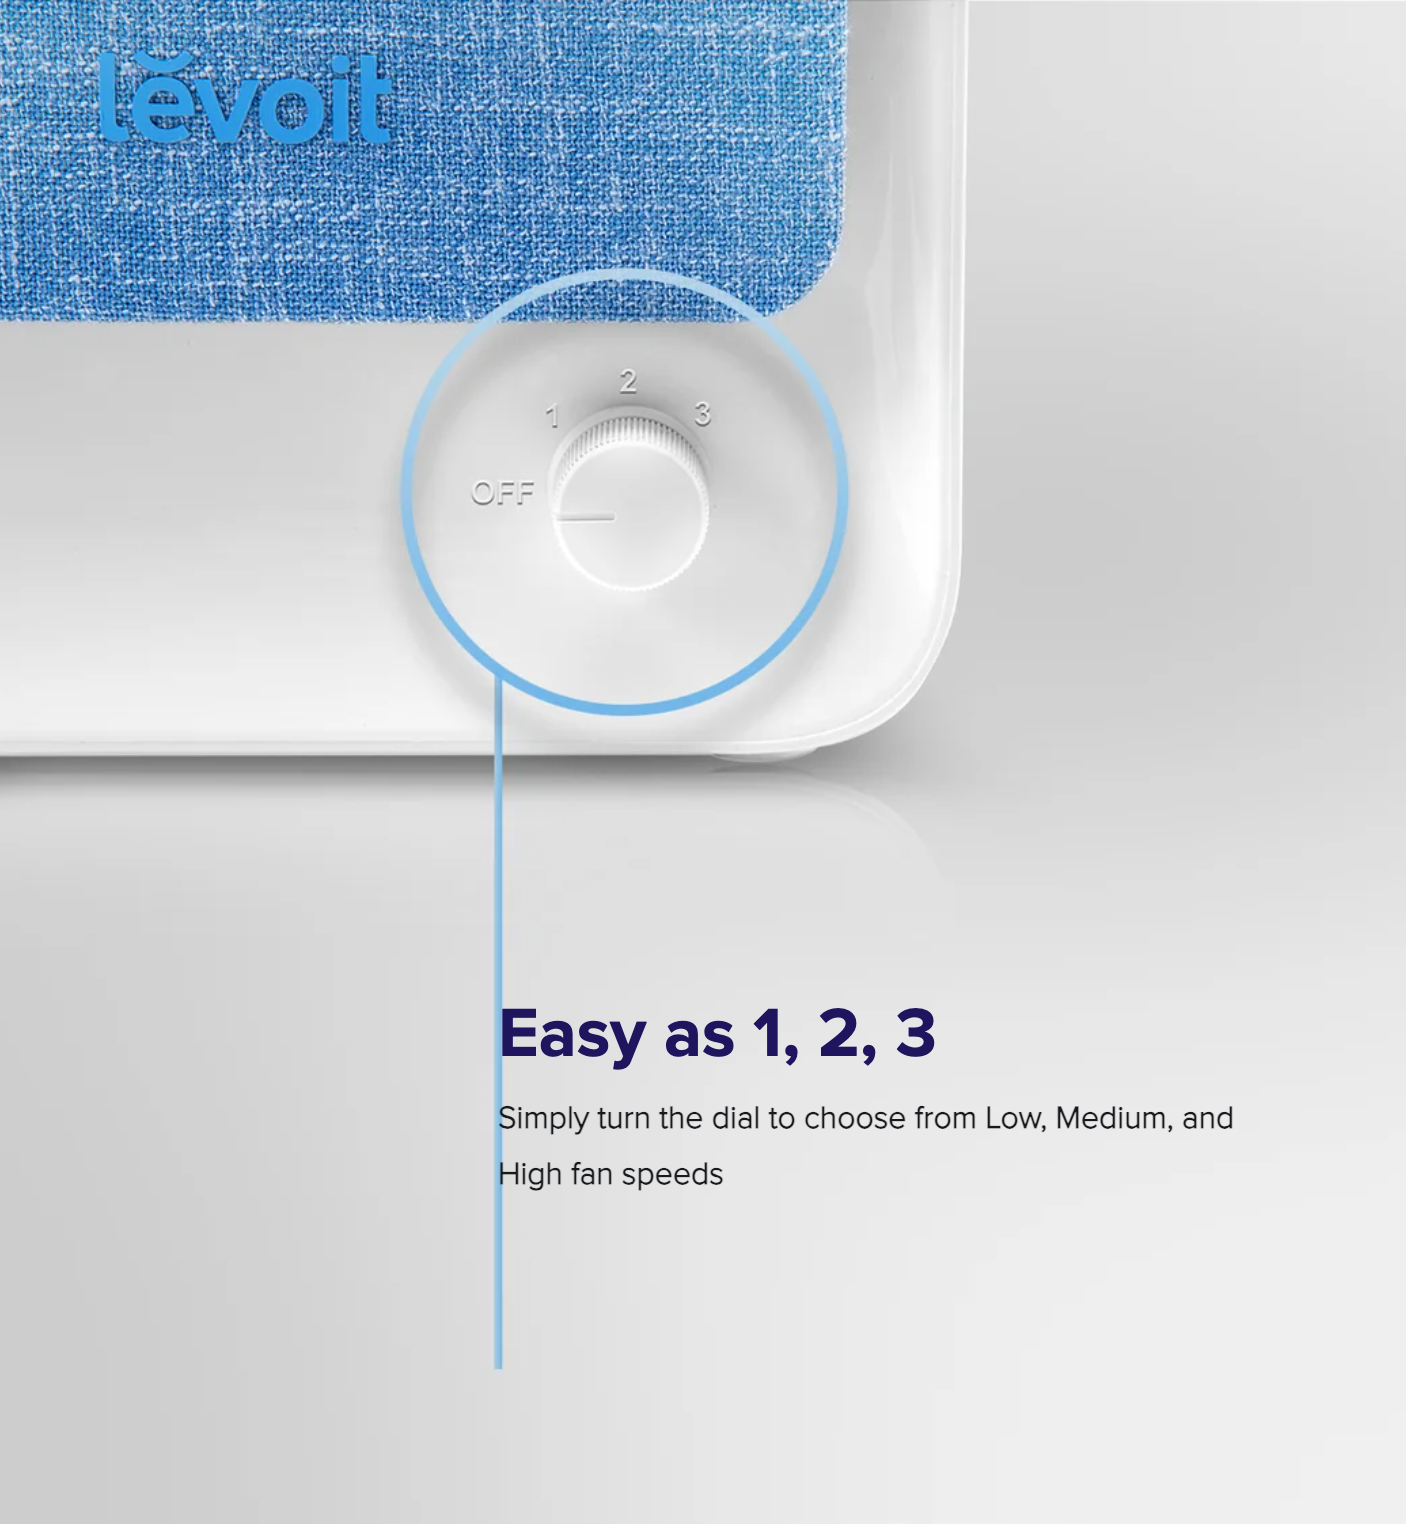  LEVOIT Air Purifiers for Bedroom Home, HEPA Freshener Filter  Small Room for Smoke, Allergies, Pet Dander, Pollen, Odor, Dust Remover,  Ozone Free, Quiet, Desktop, Office, Table Top, LV-H126, Blue : Home